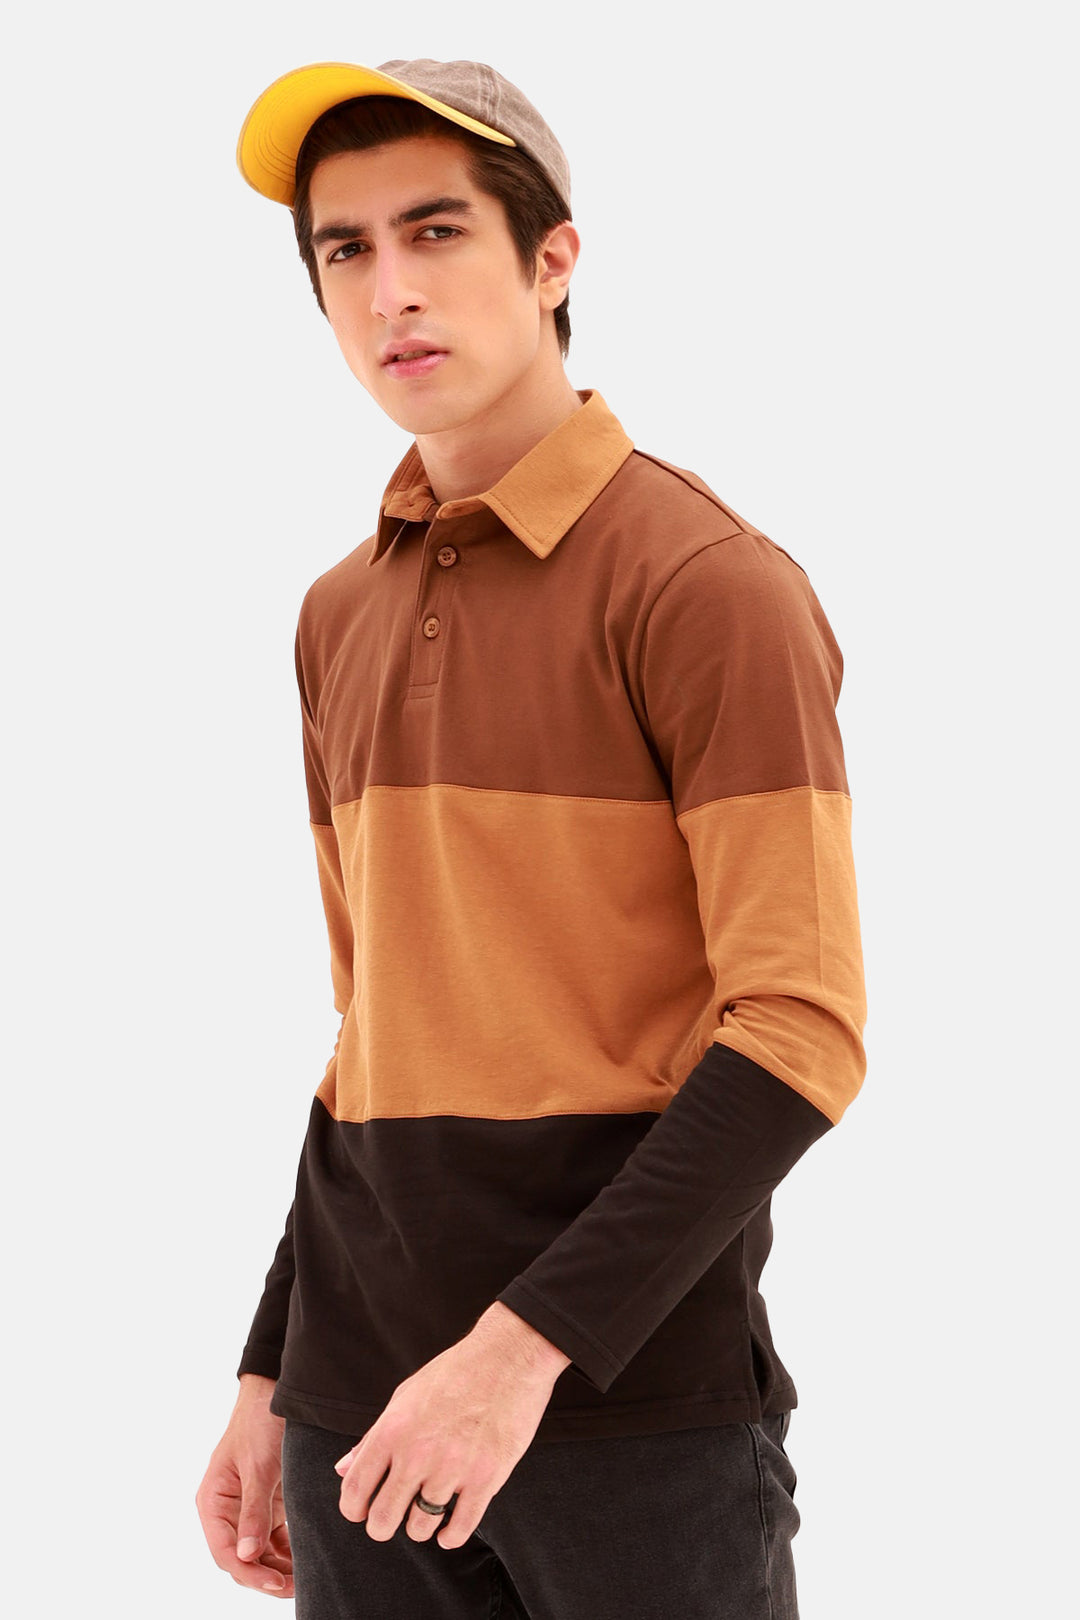 Mens Rugby Polo Shirt Online Pakistan